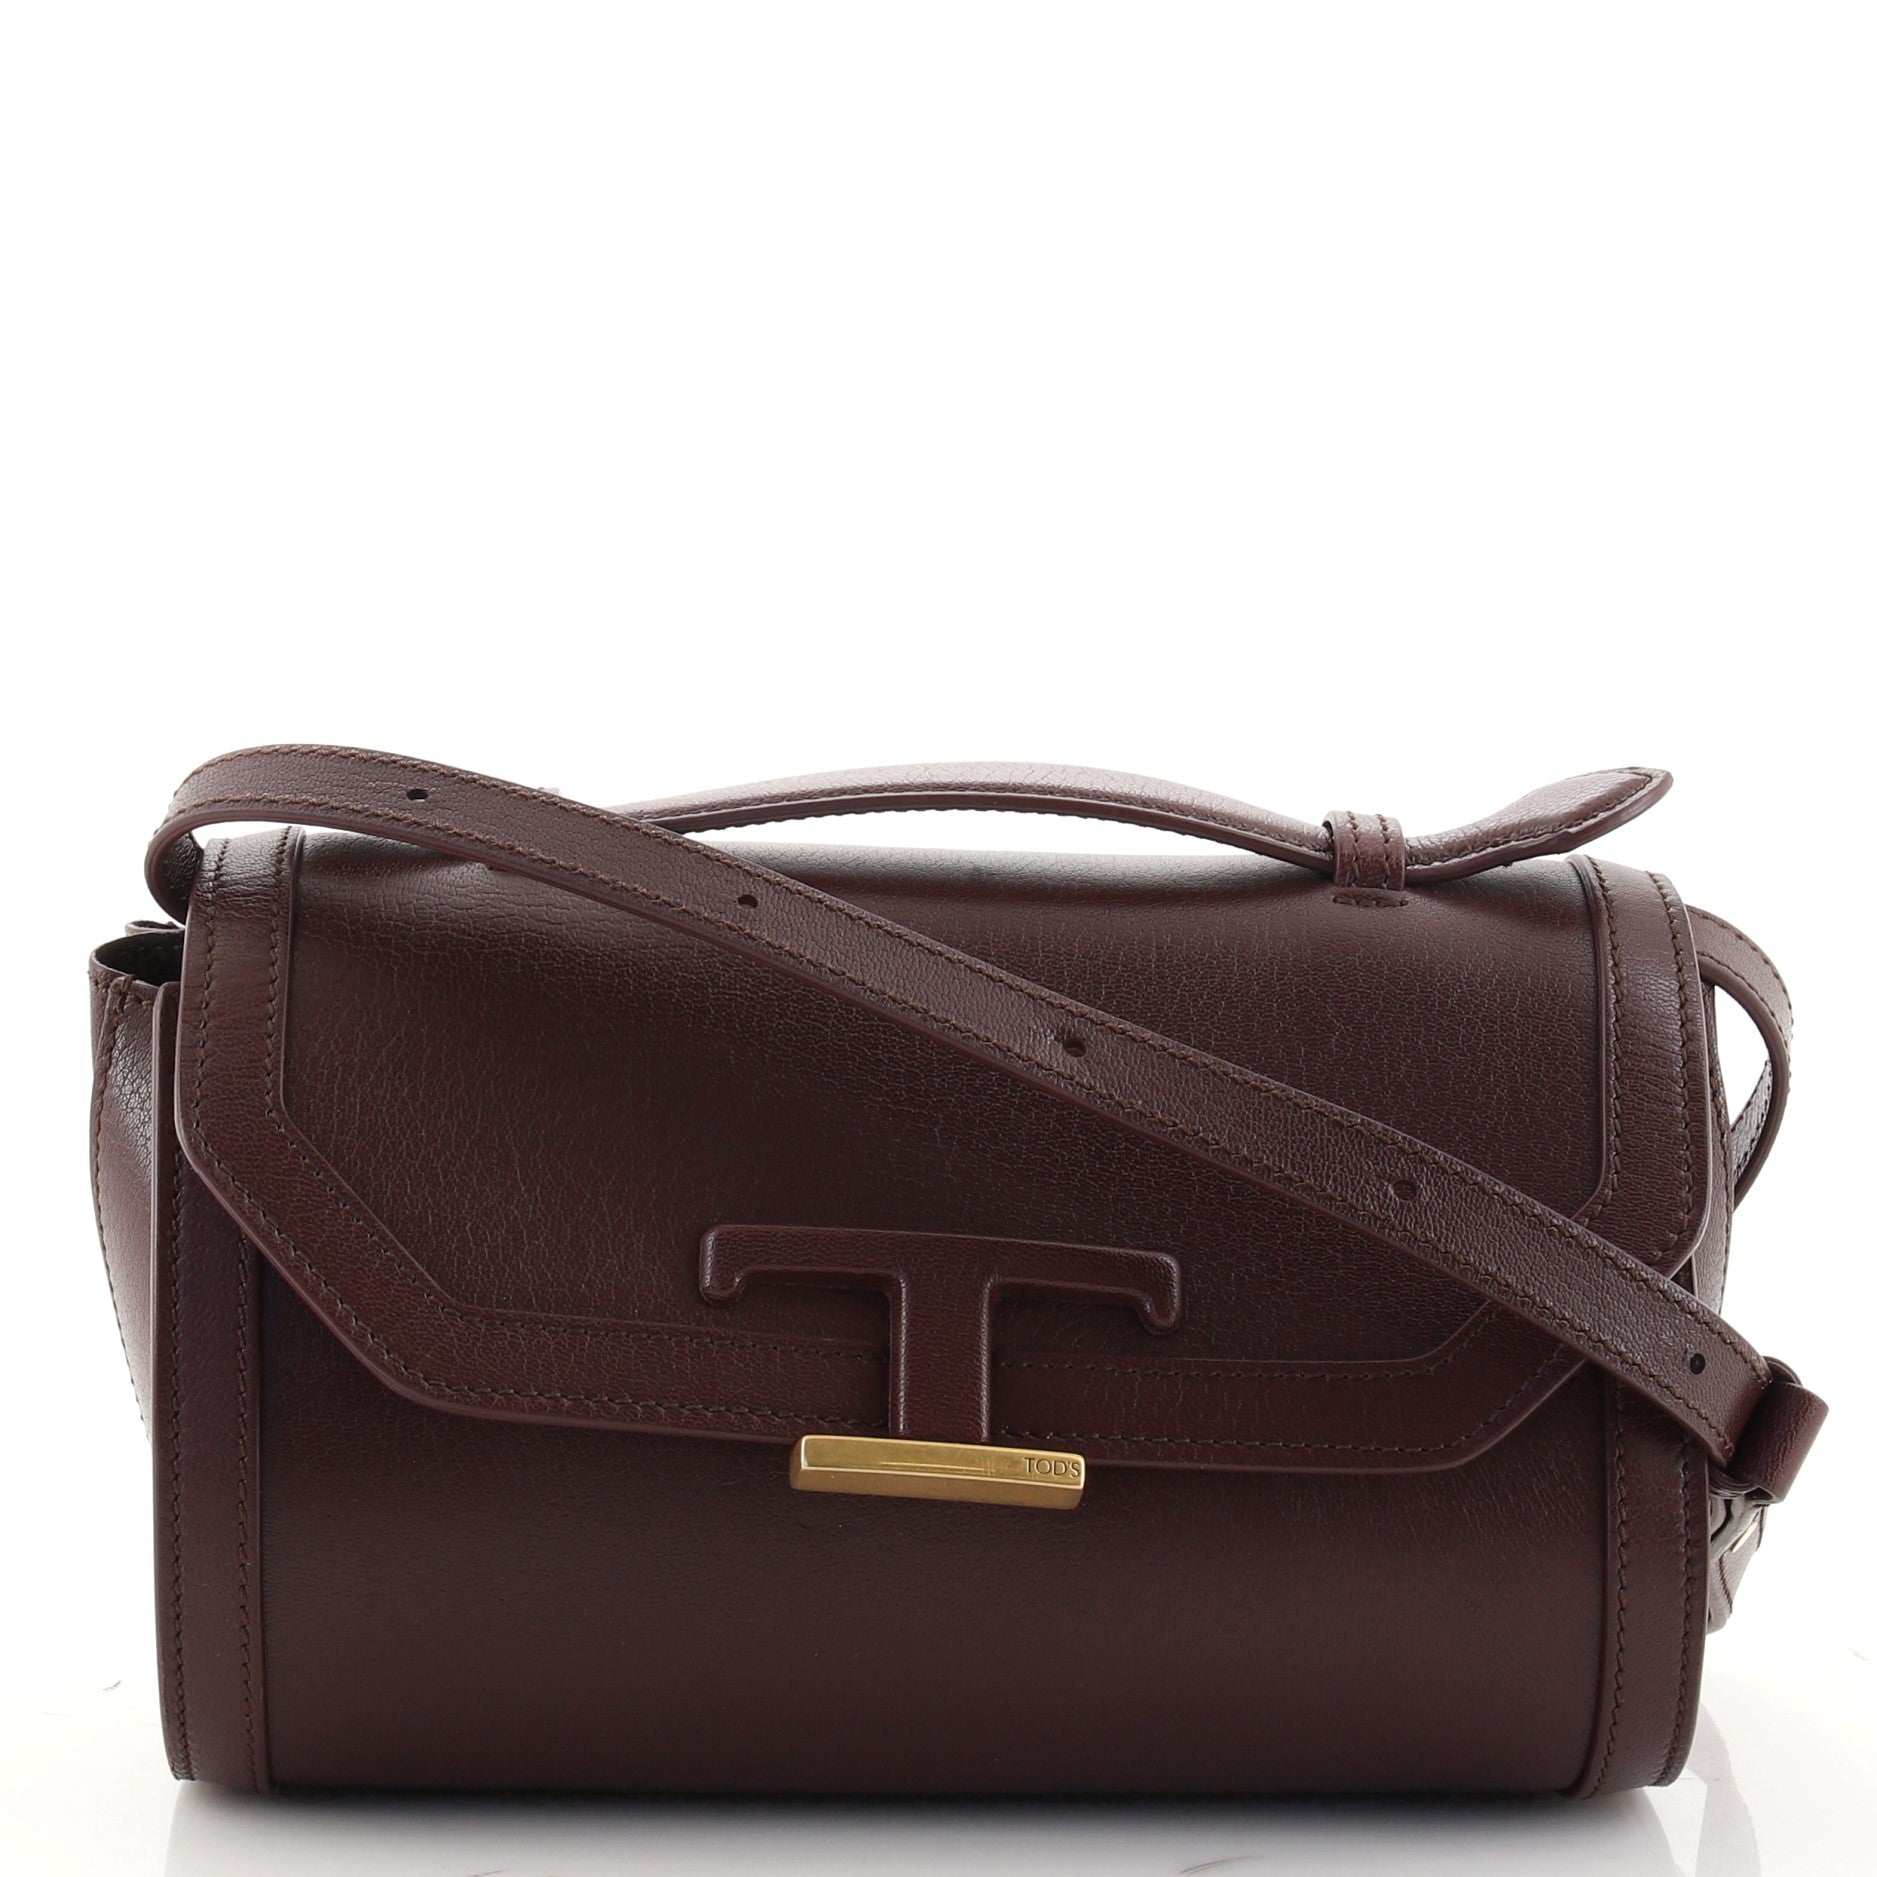 Buy Tod's Timeless Leather Mini Crossbody Bag, Maroon Color Women